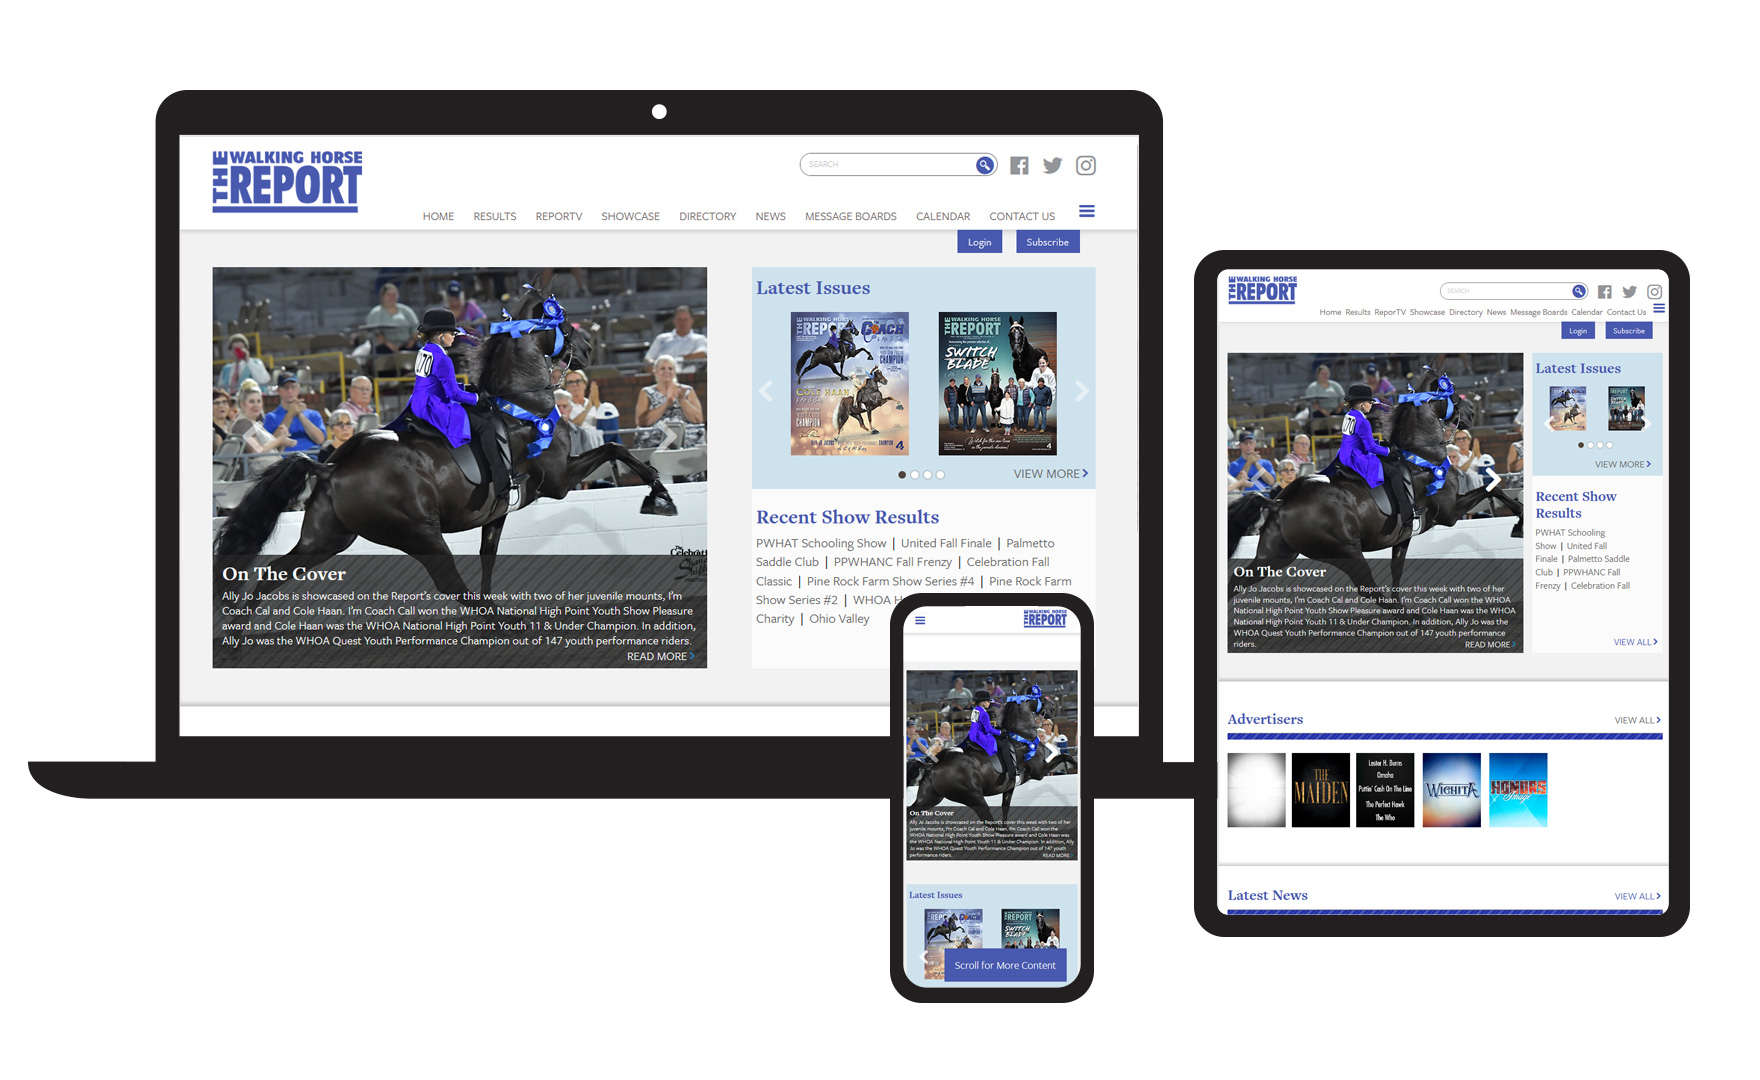 Photo of the Walking Horse Report website displayed in three different devices: PC, tablet, and mobile.